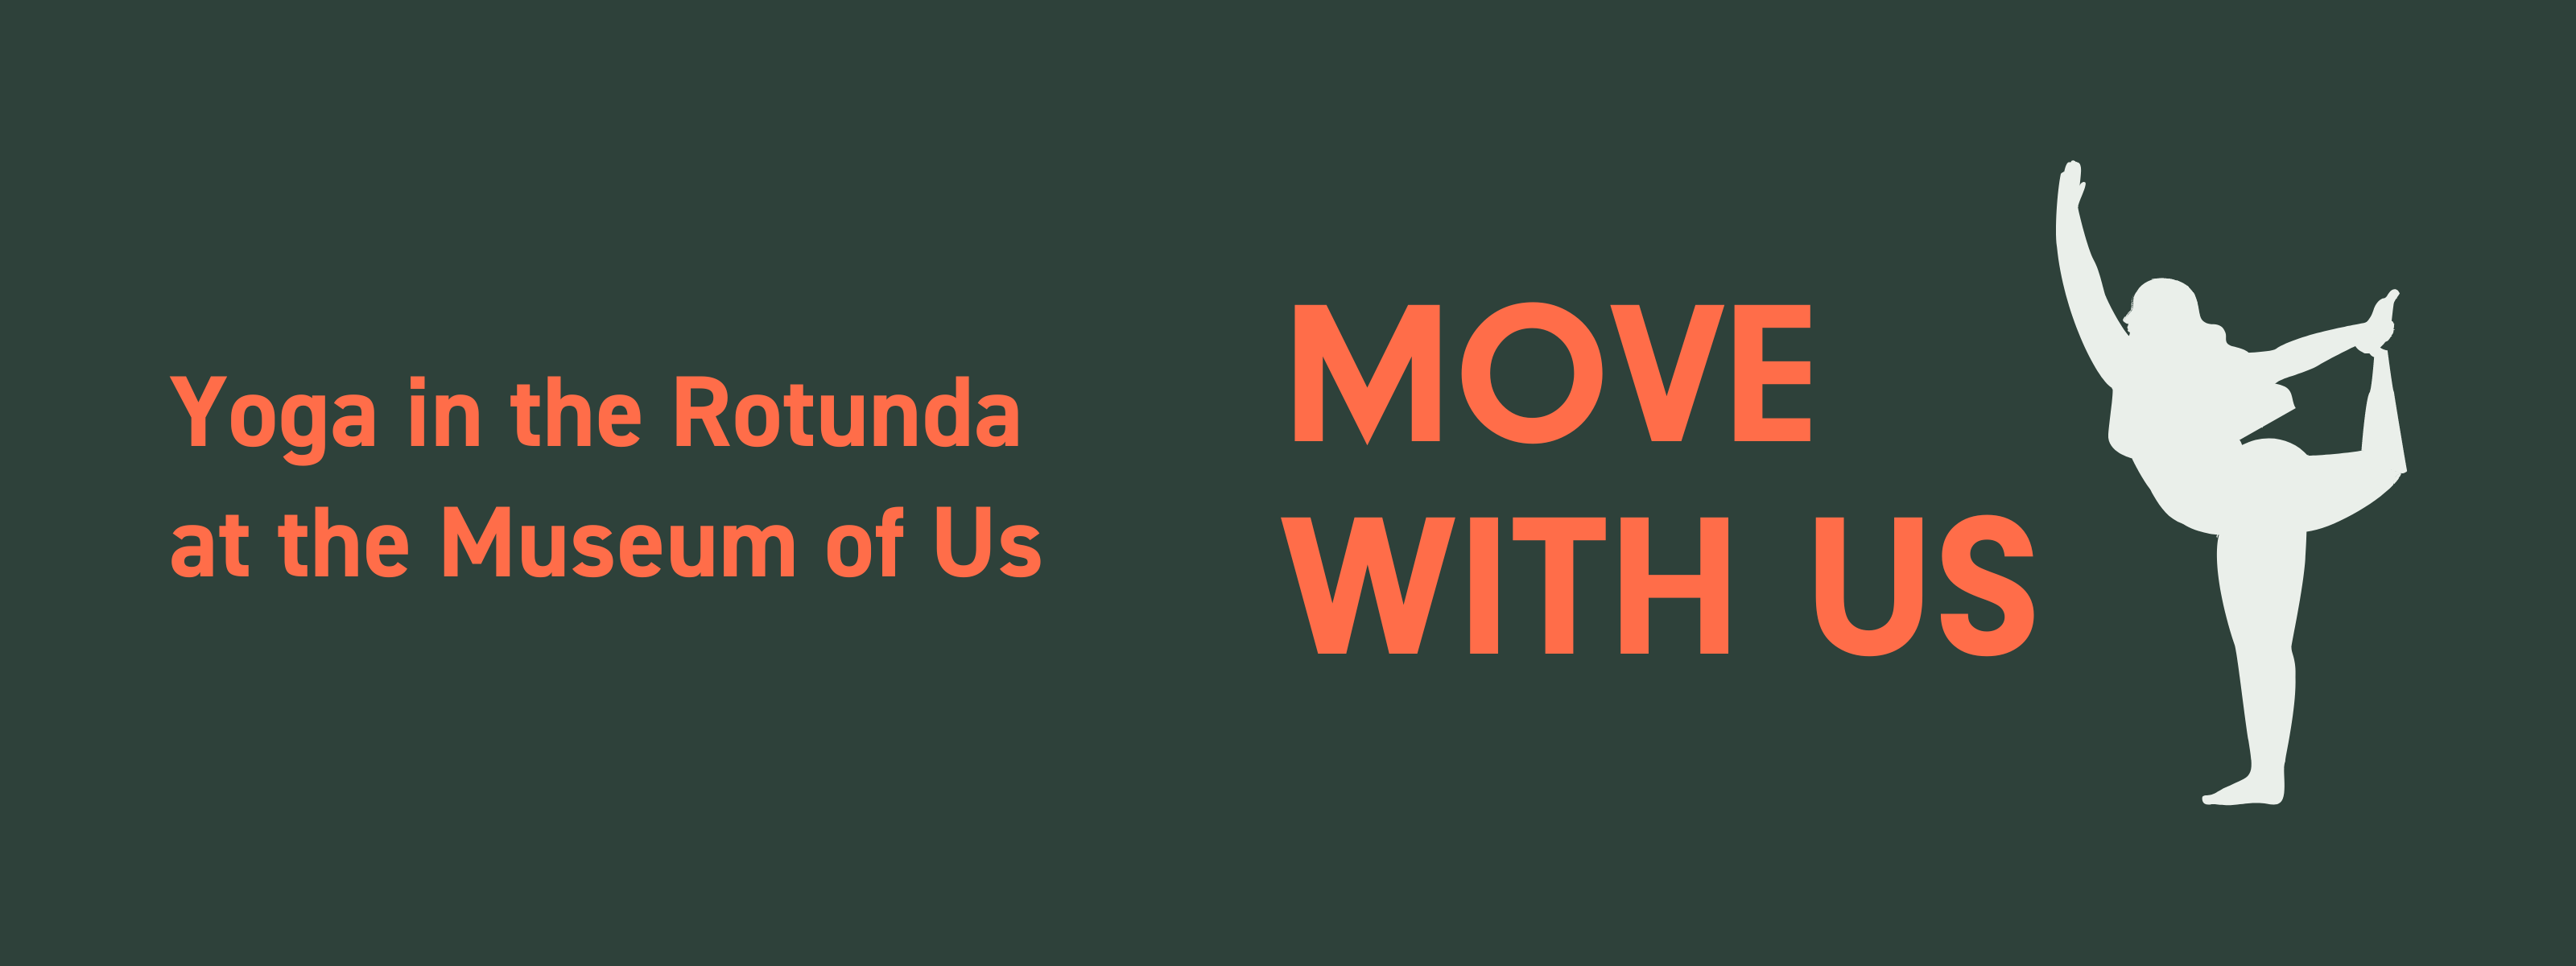 On a dark green background, orange text reads "Yoga in the Rotunda at the Museum of Us" and "Move with Us" next to a white silhouette figure in a yoga pose.